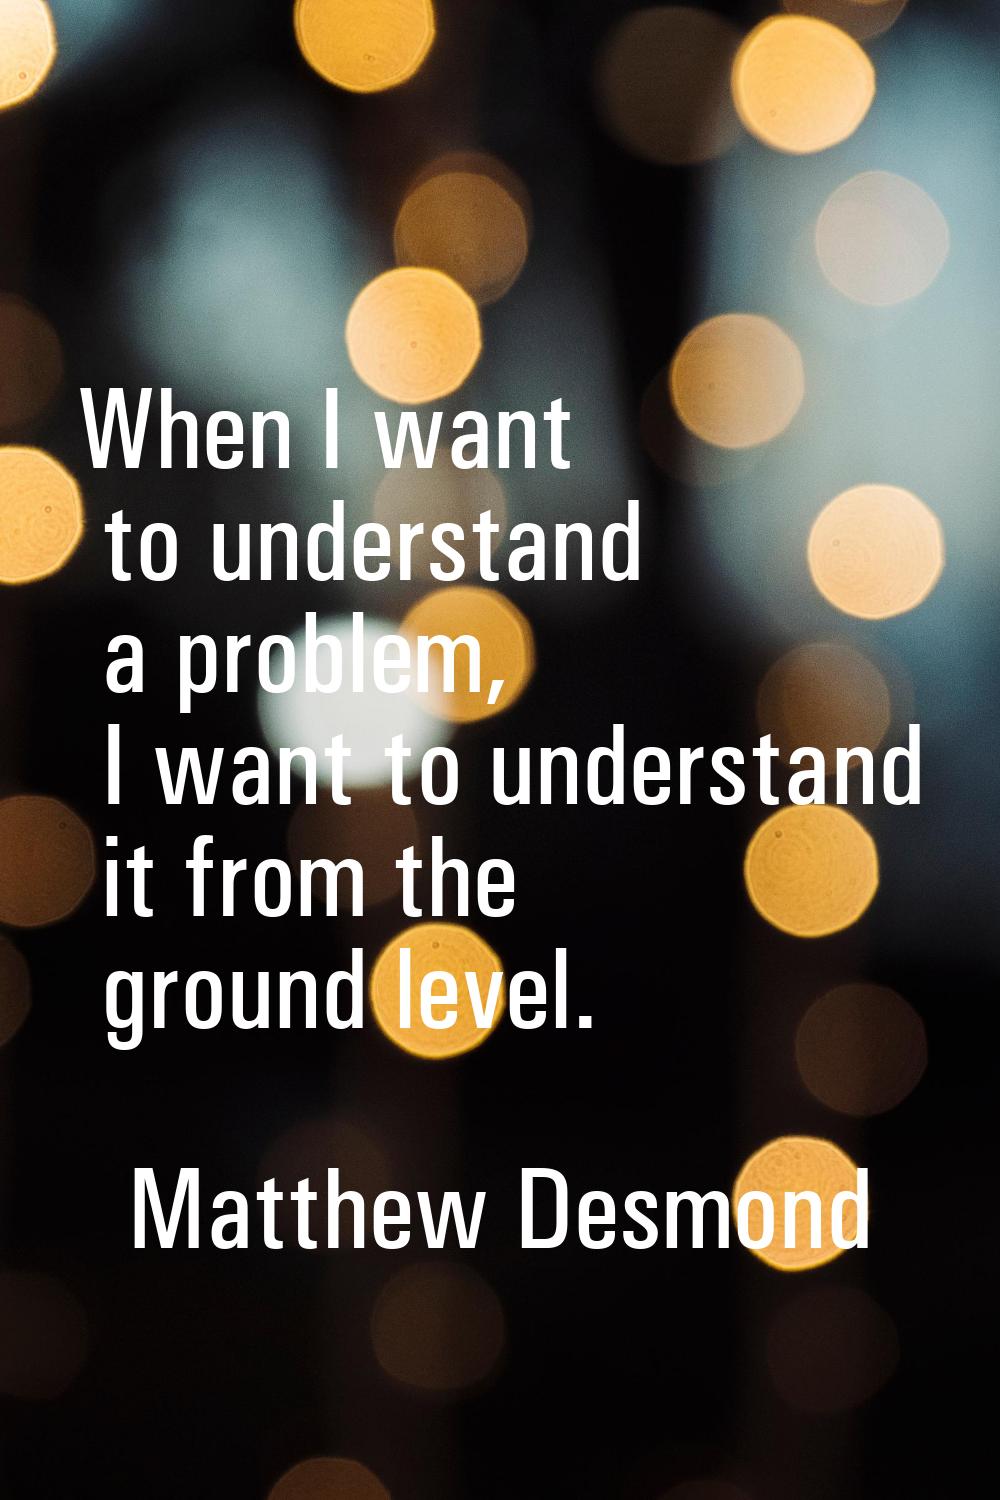 When I want to understand a problem, I want to understand it from the ground level.